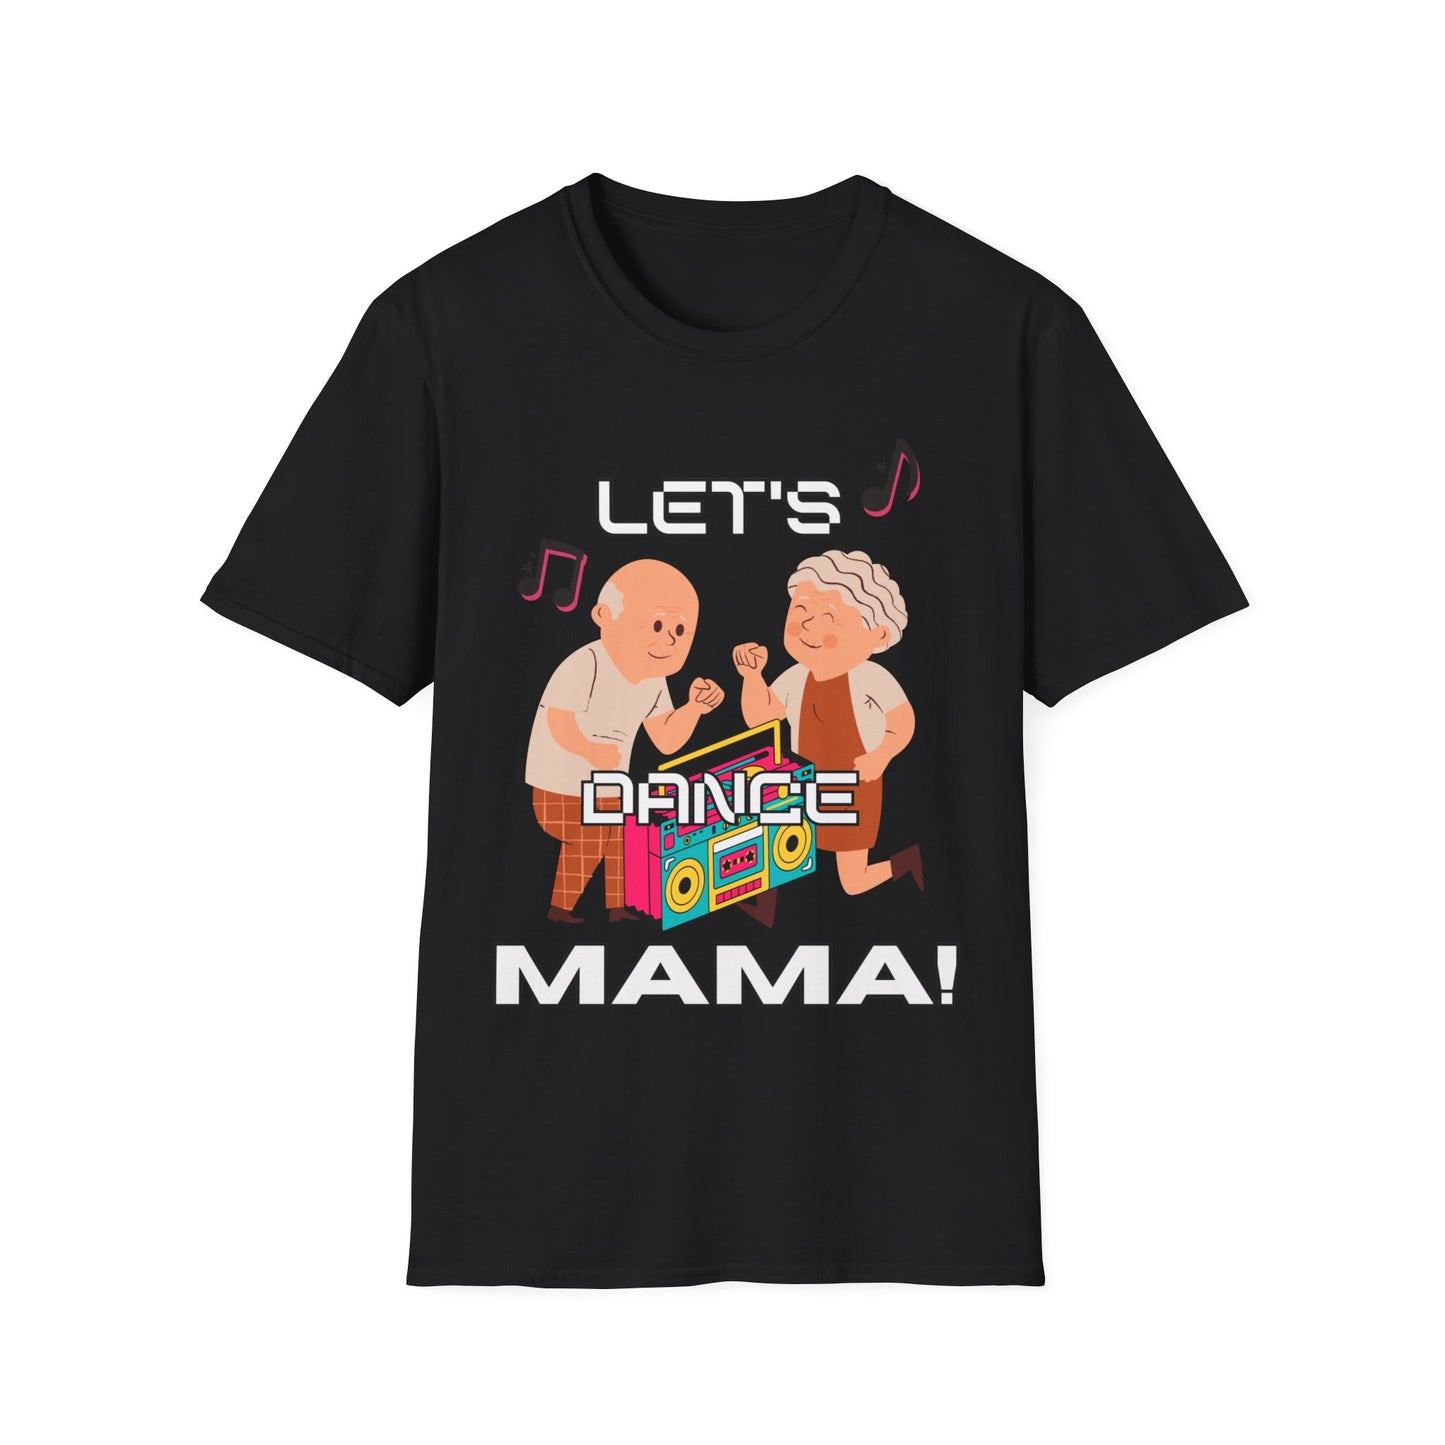 Unisex Softstyle (LET'S DANCE MAMA) T-Shirt